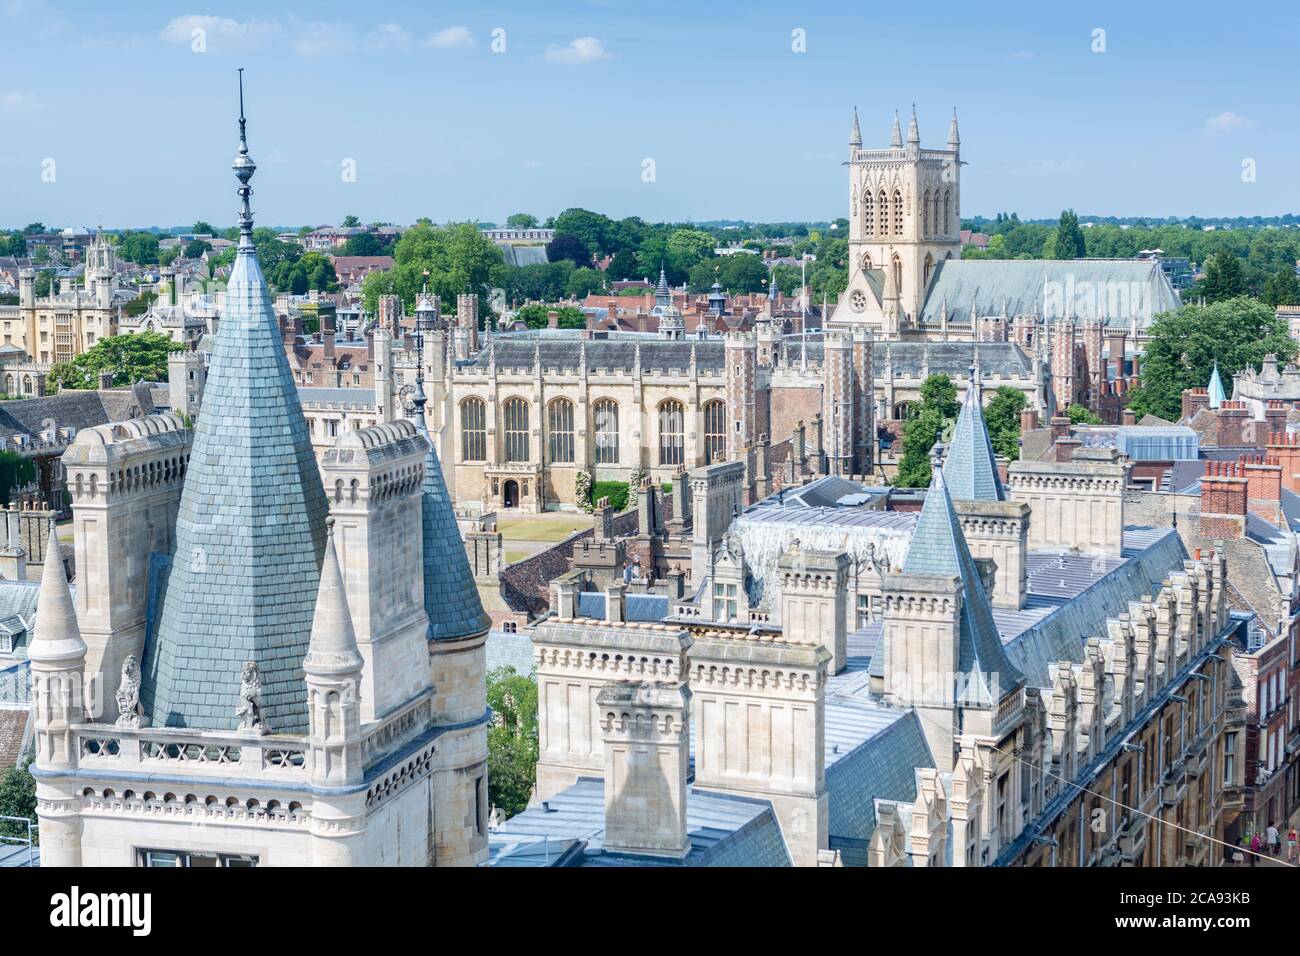 High angle view of the skyline of the city of Cambridge showing university buildings in Caius, Trinity and St John's colleges, Cambridge Stock Photo